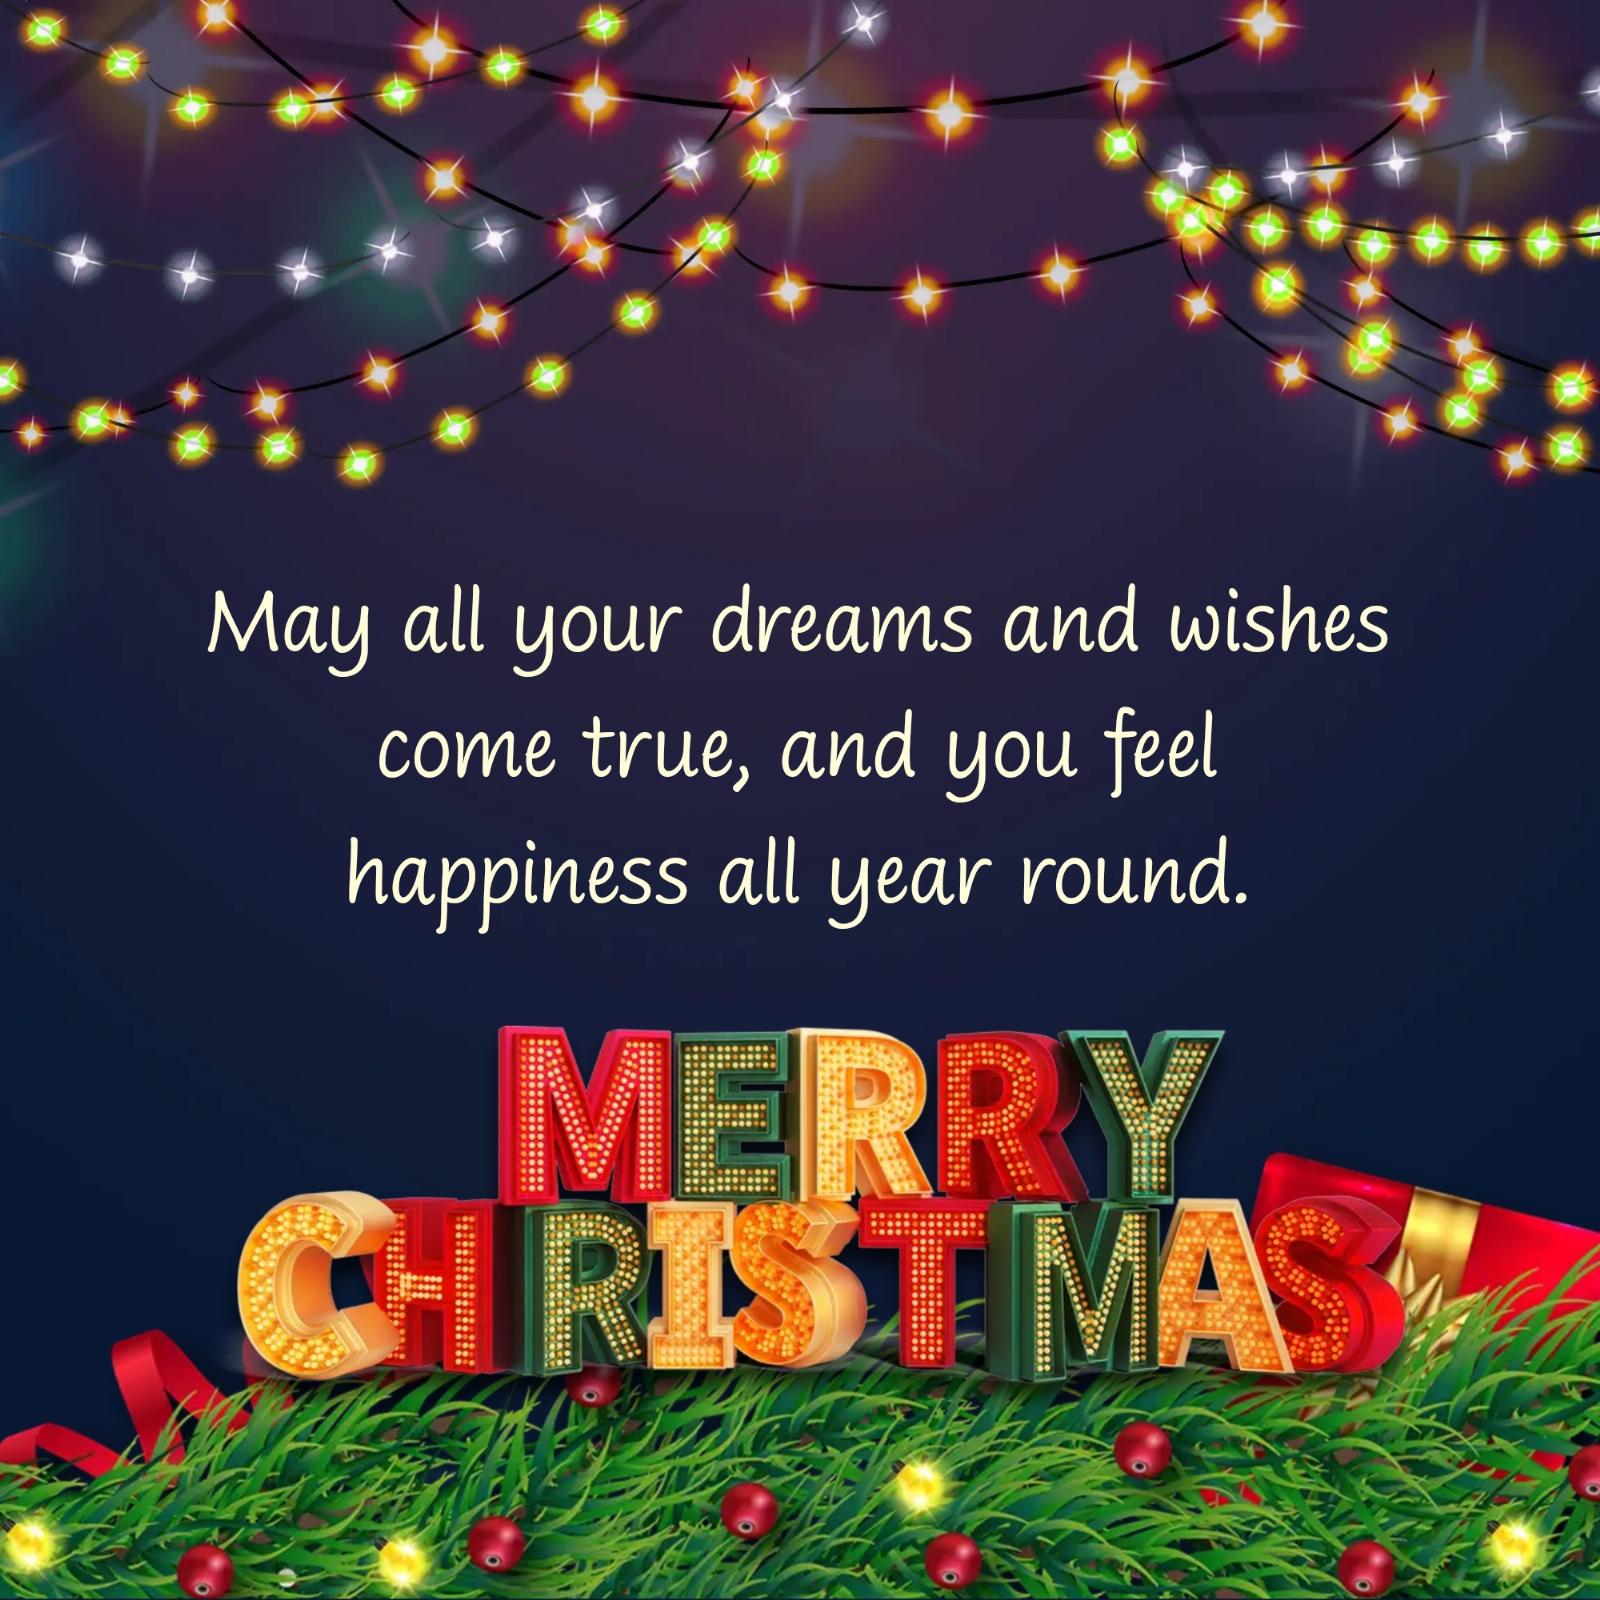 May all your dreams and wishes come true and you feel happiness